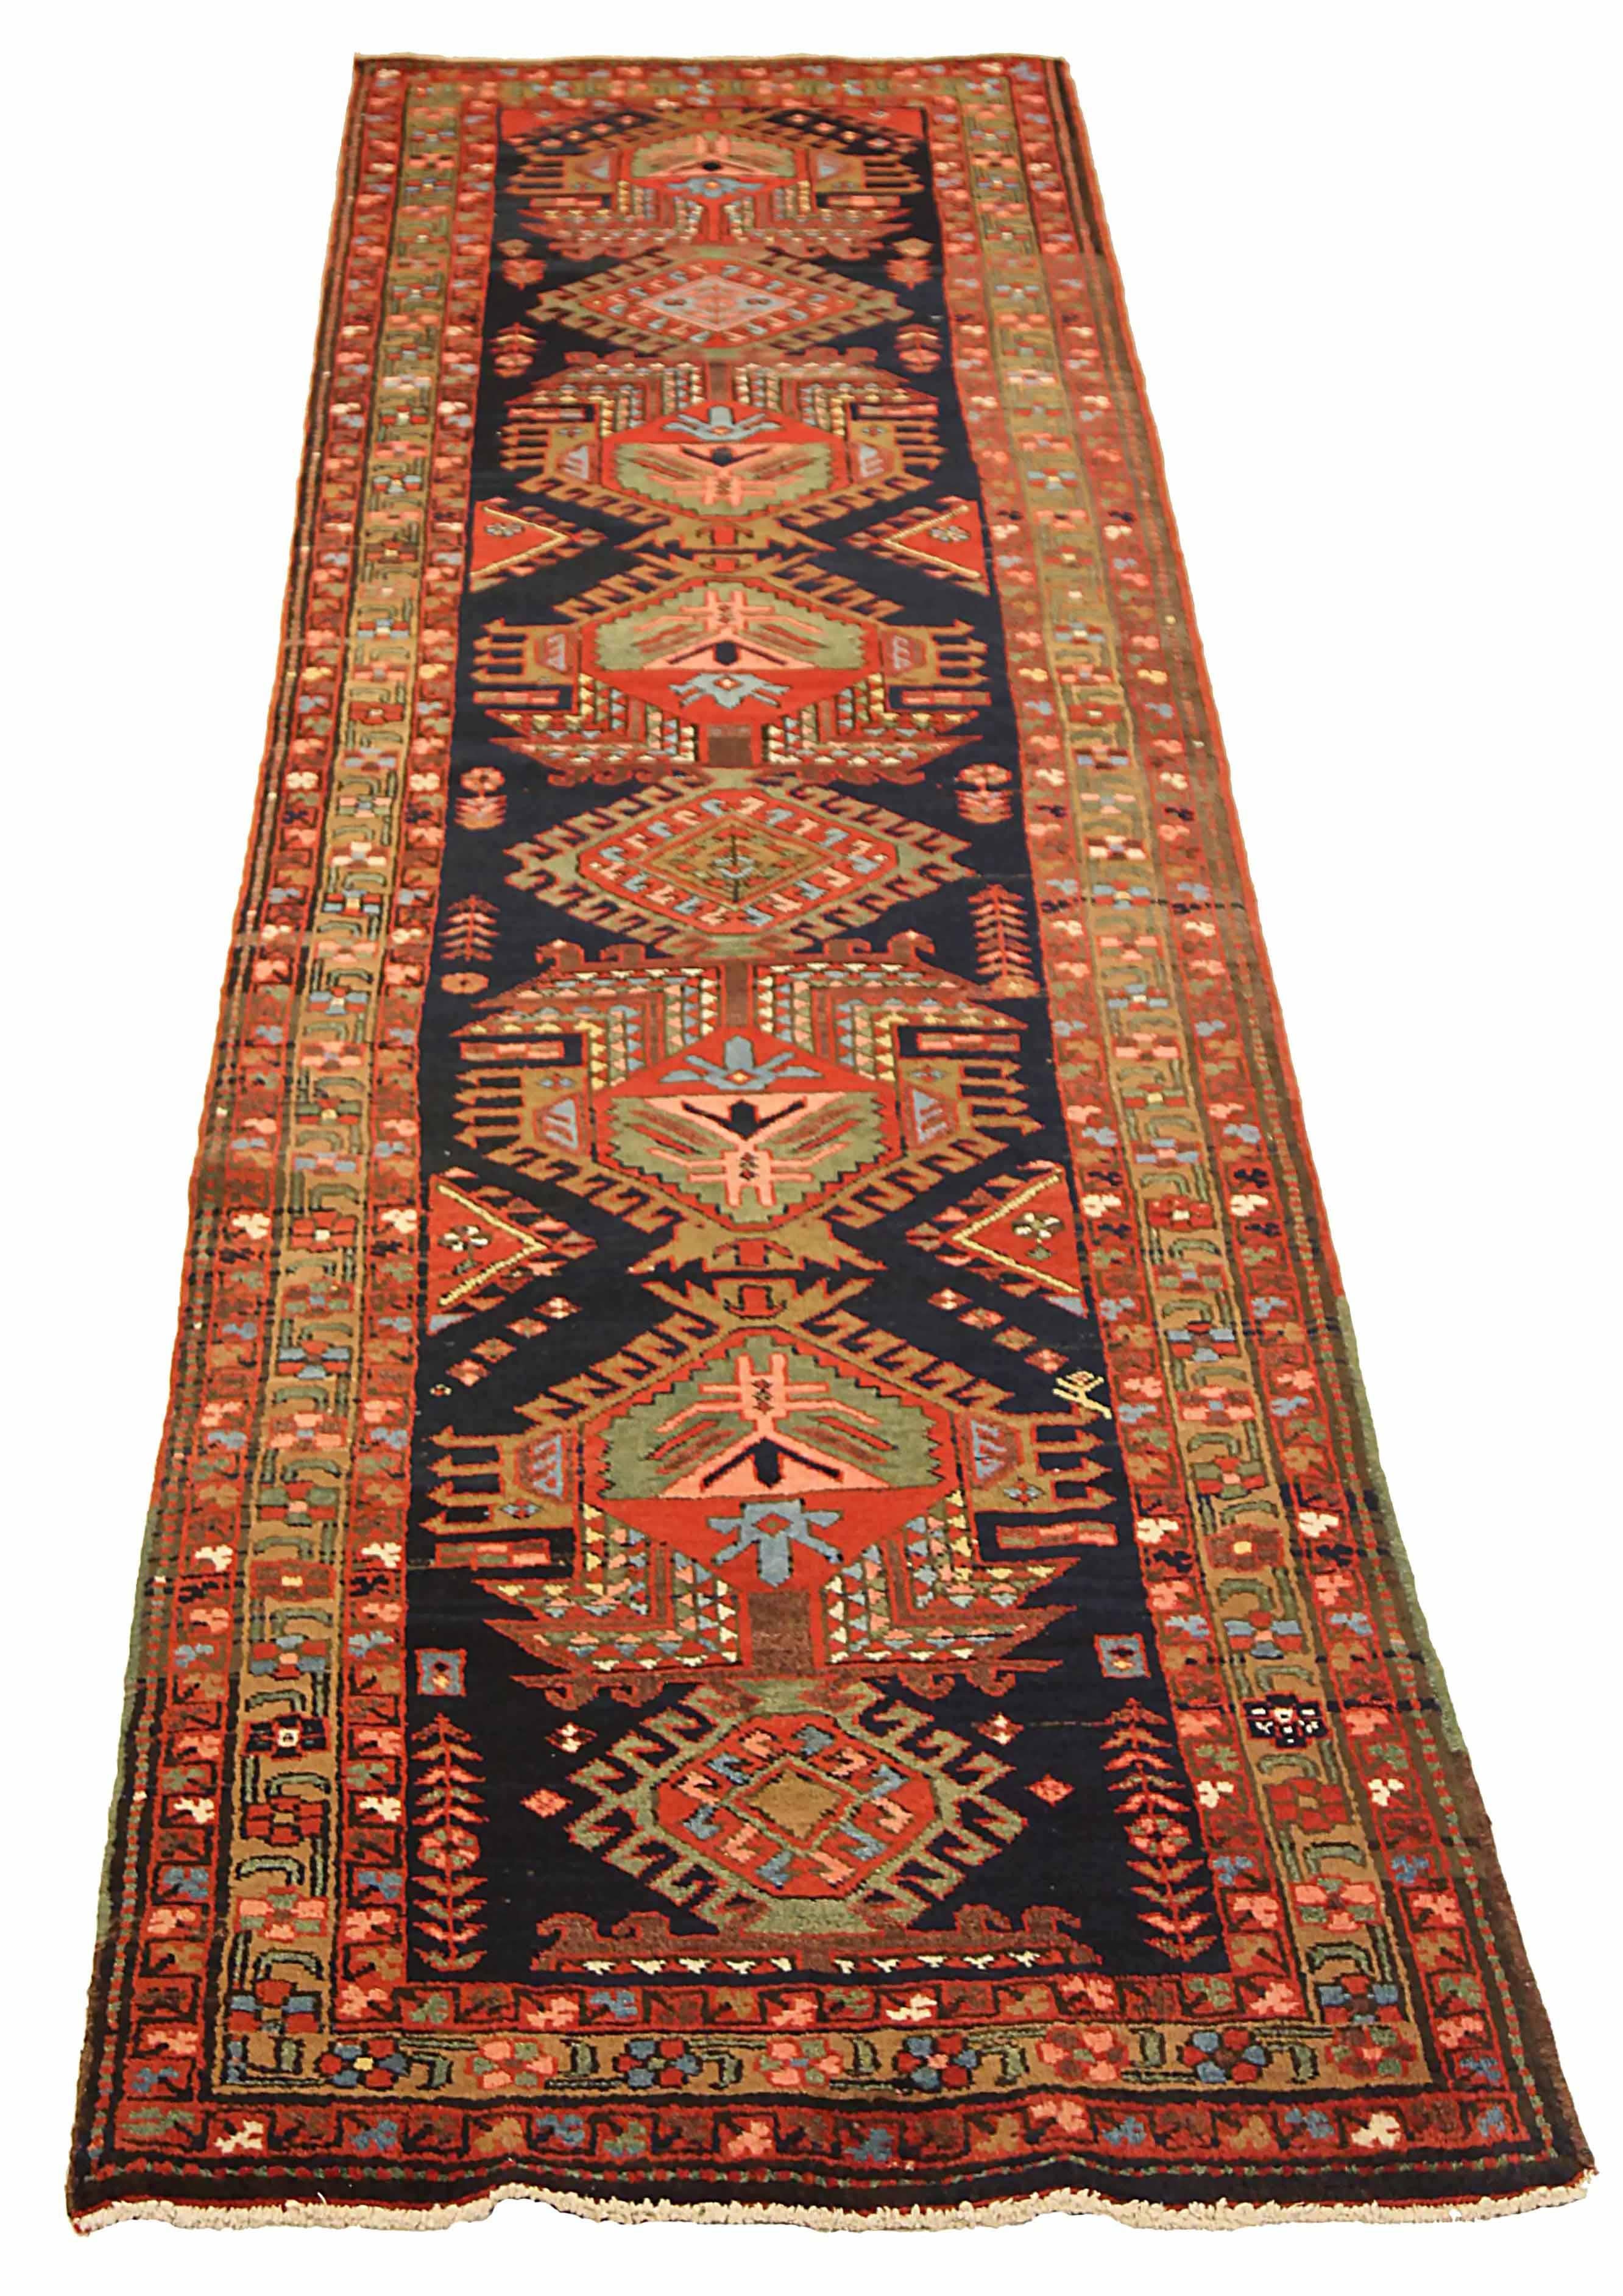 Antique Russian runner rug handwoven from the finest sheep’s wool. It’s colored with all-natural vegetable dyes that are safe for humans and pets. It’s a traditional Saison design handwoven by expert artisans. It’s a lovely runner rug that can be